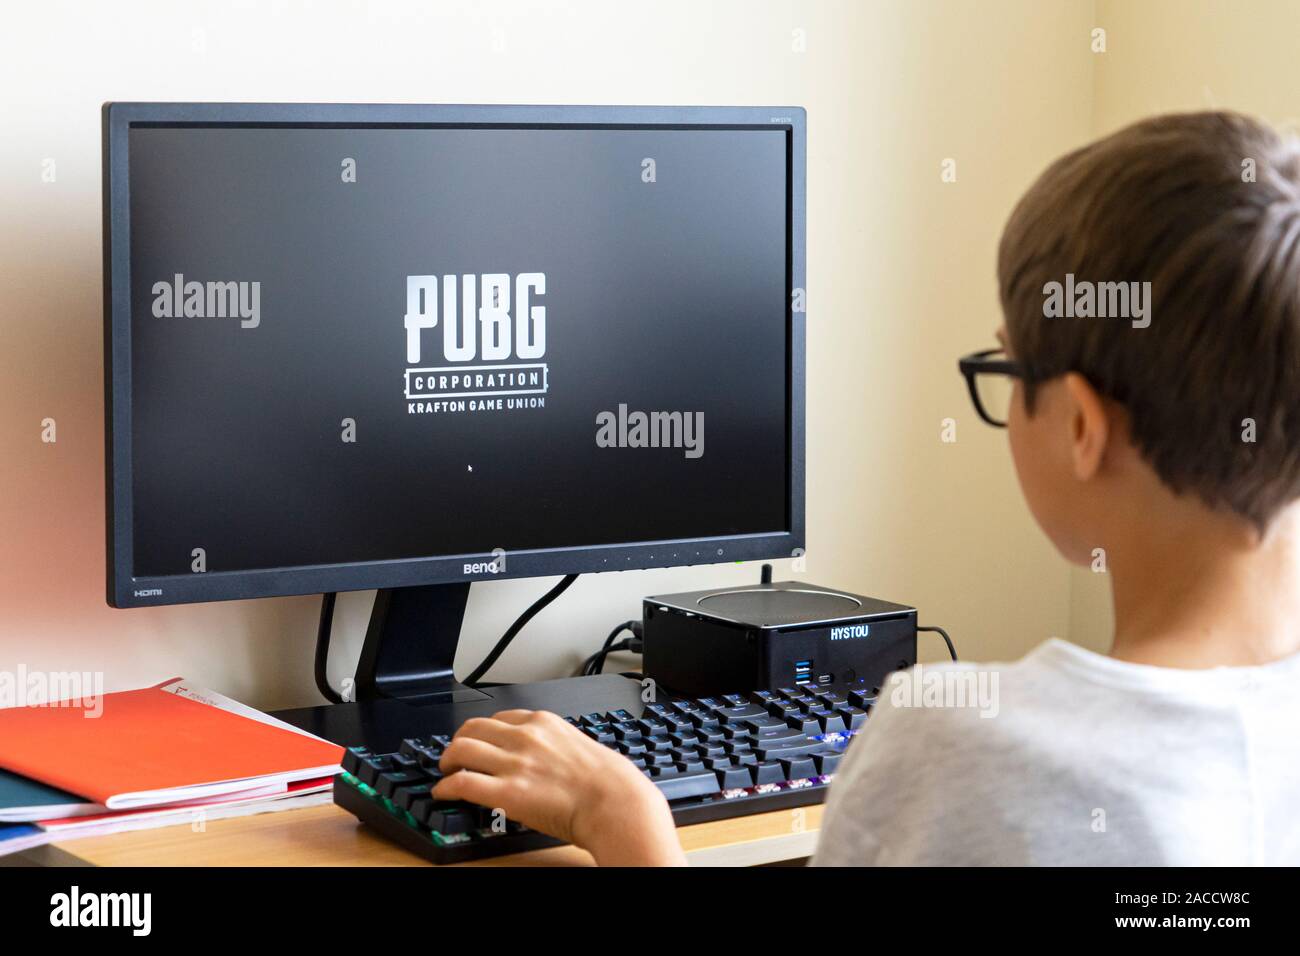 Boy playing PUBG Lite video game on PC at home. PUBG Lite is popular online video game. Vilnius, Lithuania - 19 October 2019 Stock Photo